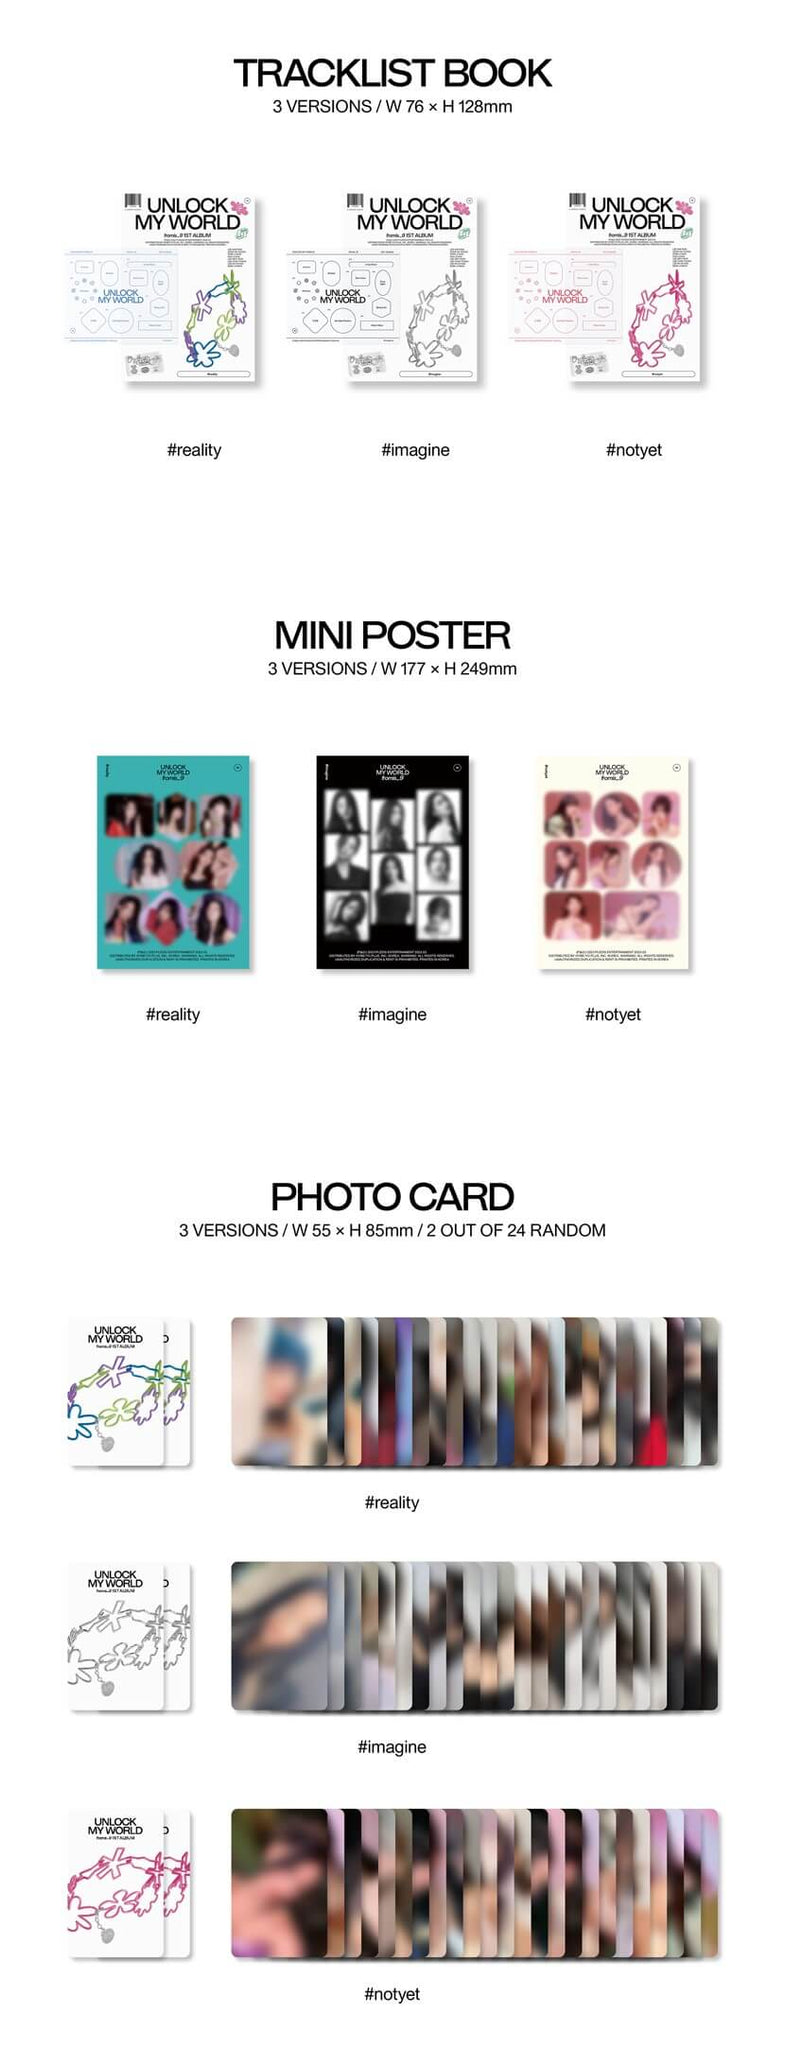  fromis_9 1st Full Album Unlock My World Inclusions Tracklist Book Mini Poster Photocards